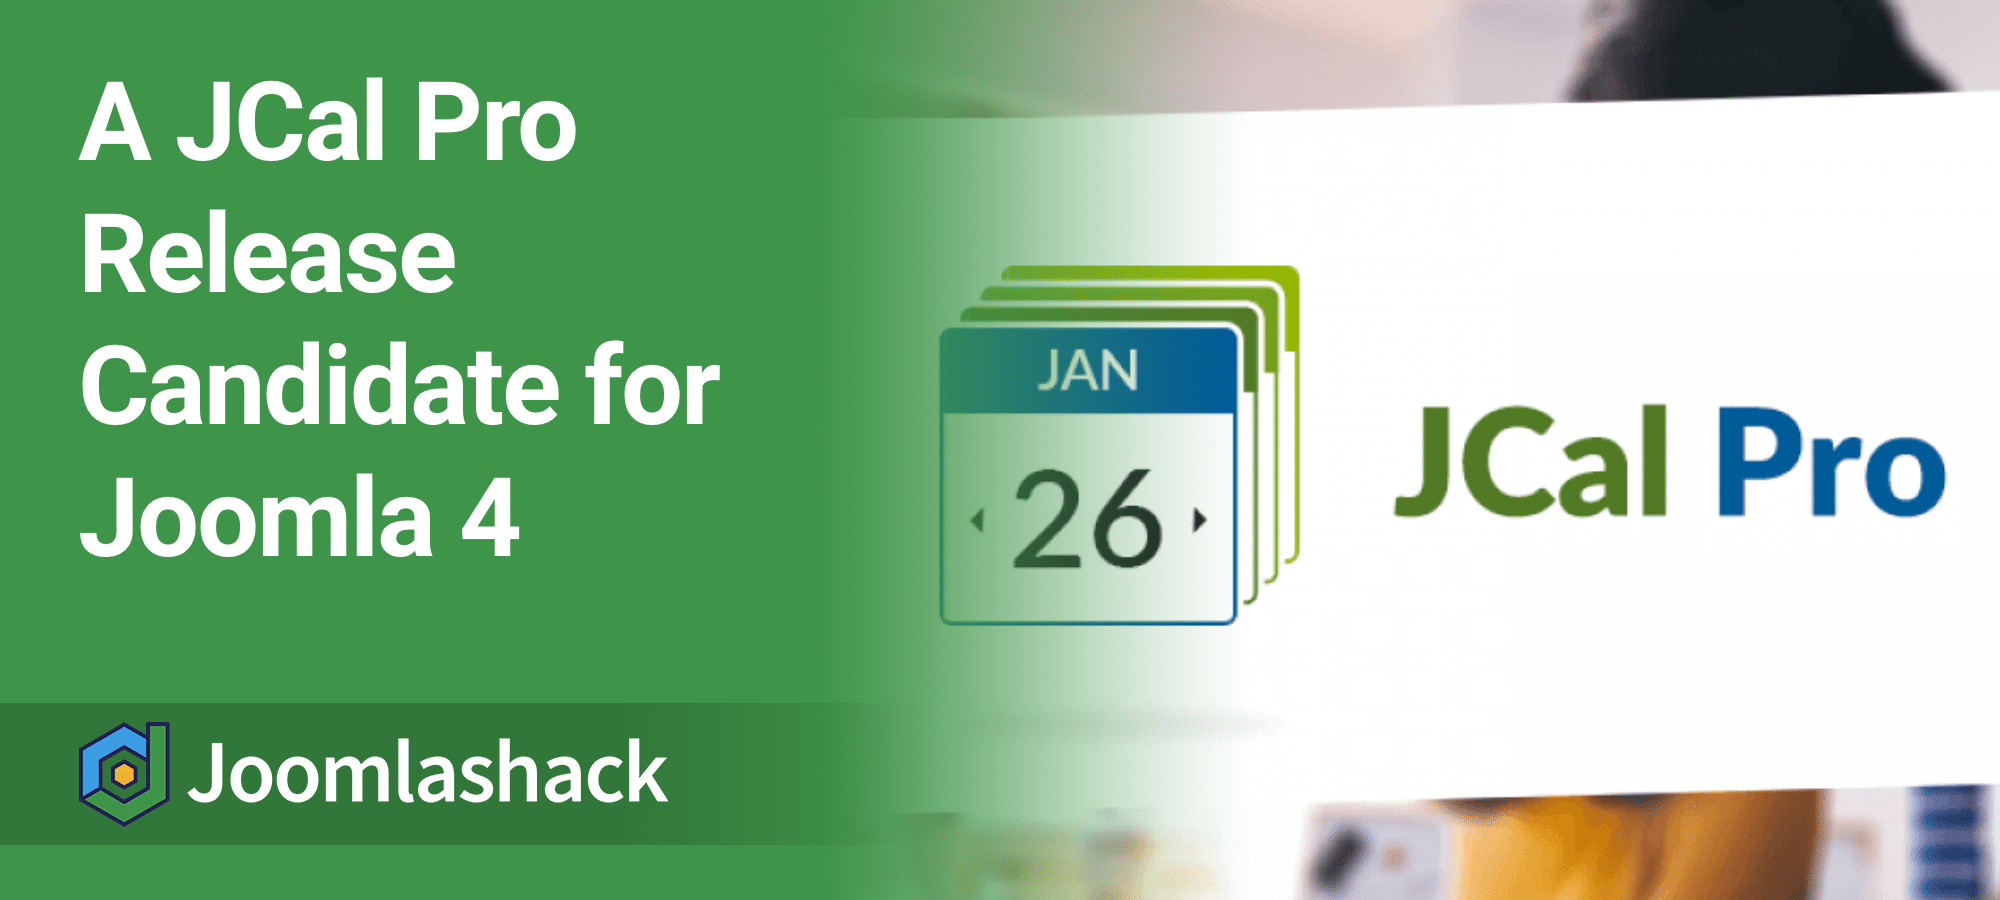 A JCal Pro Release Candidate is Available for Joomla 4